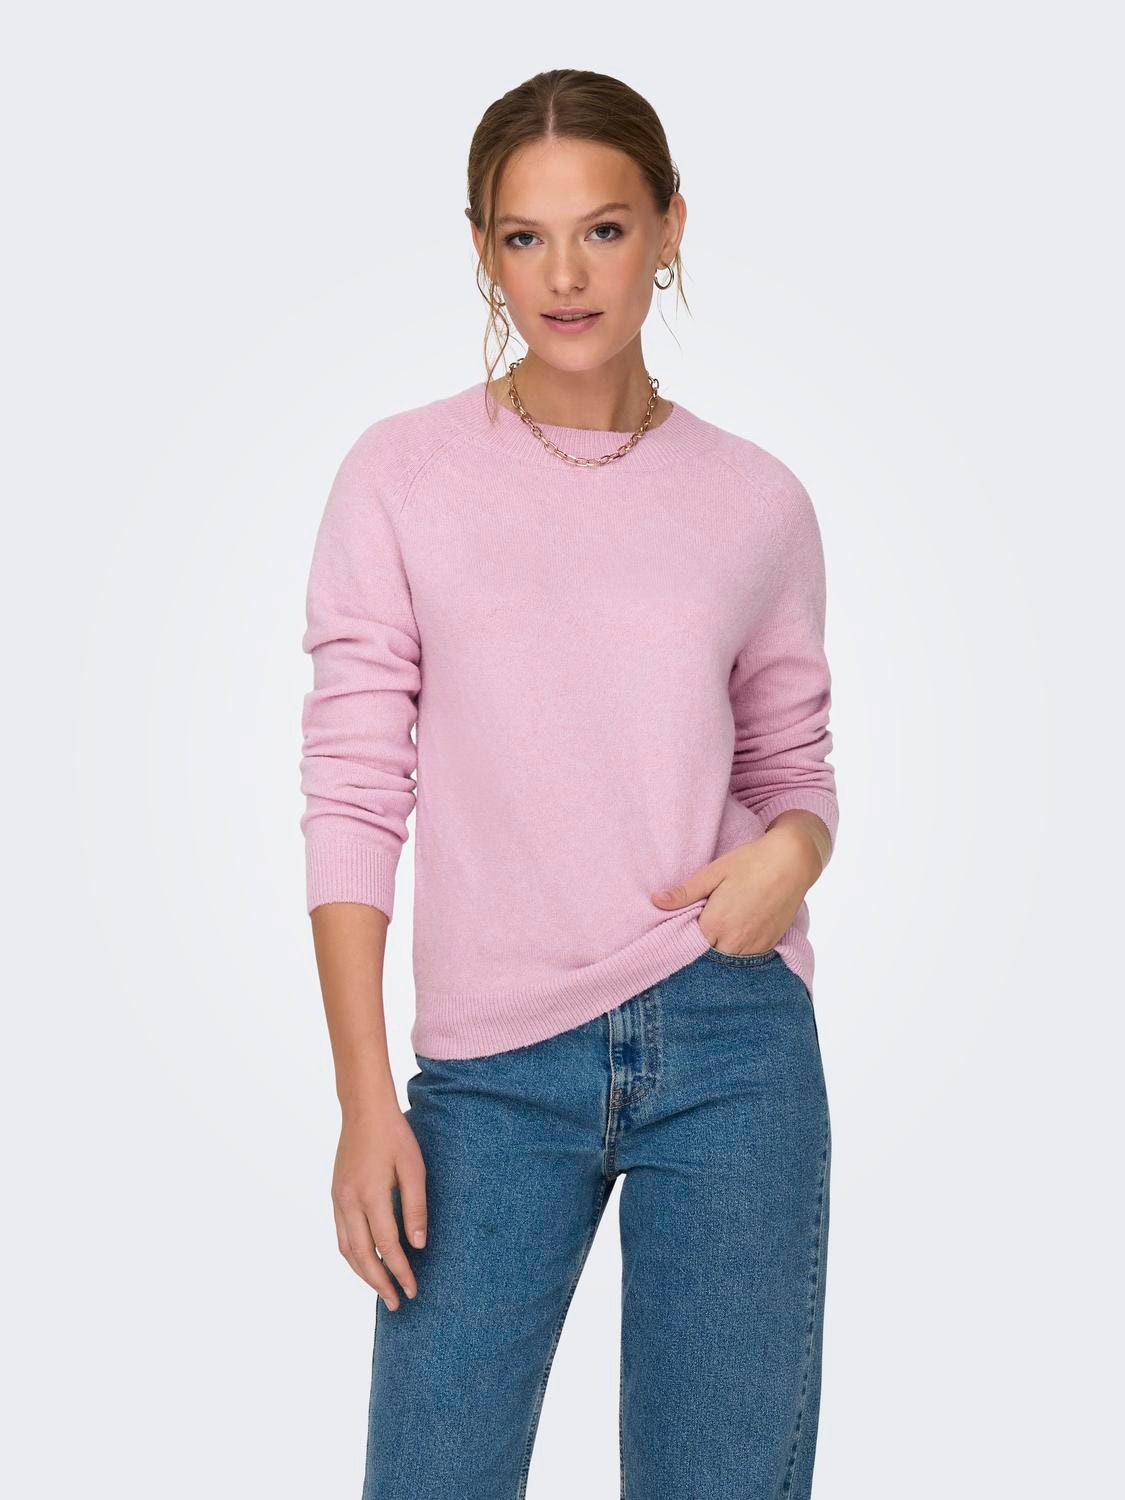 ONLY Pull-overs Col rond Poignets côtelés -Pastel Lavender - 15204279